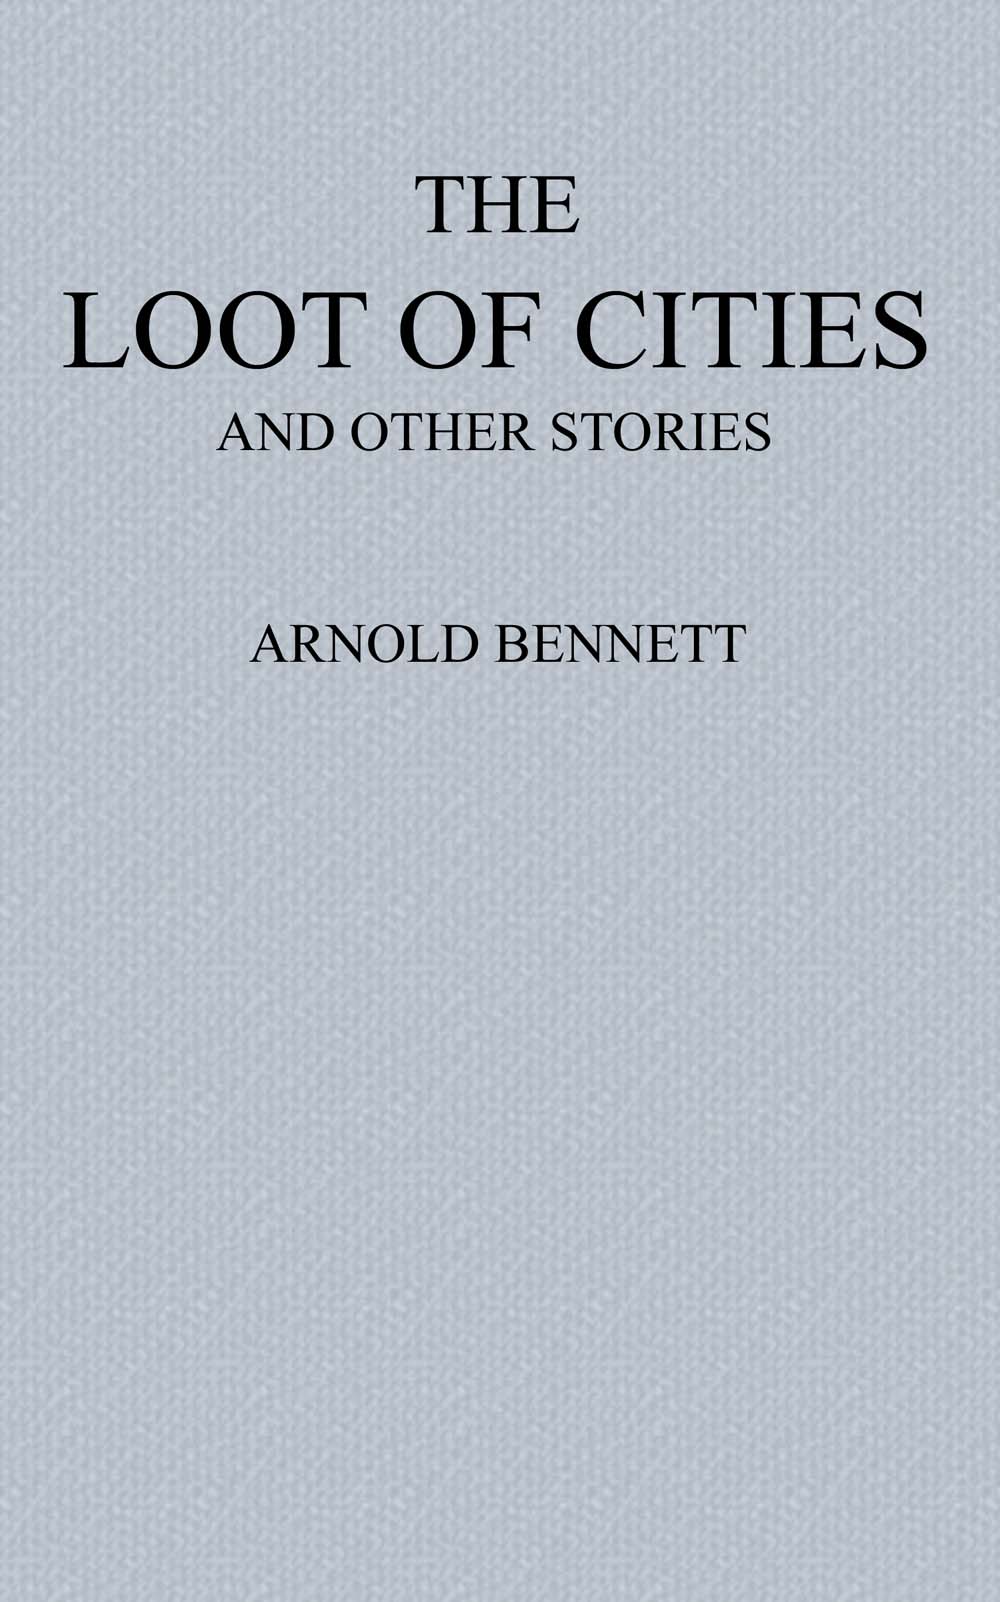 The Loot of Cities Being the Adventures of a Millionaire in Search of Joy (A Fantasia); and Other Stories, by Arnold Bennett—A Project Gutenberg eBook